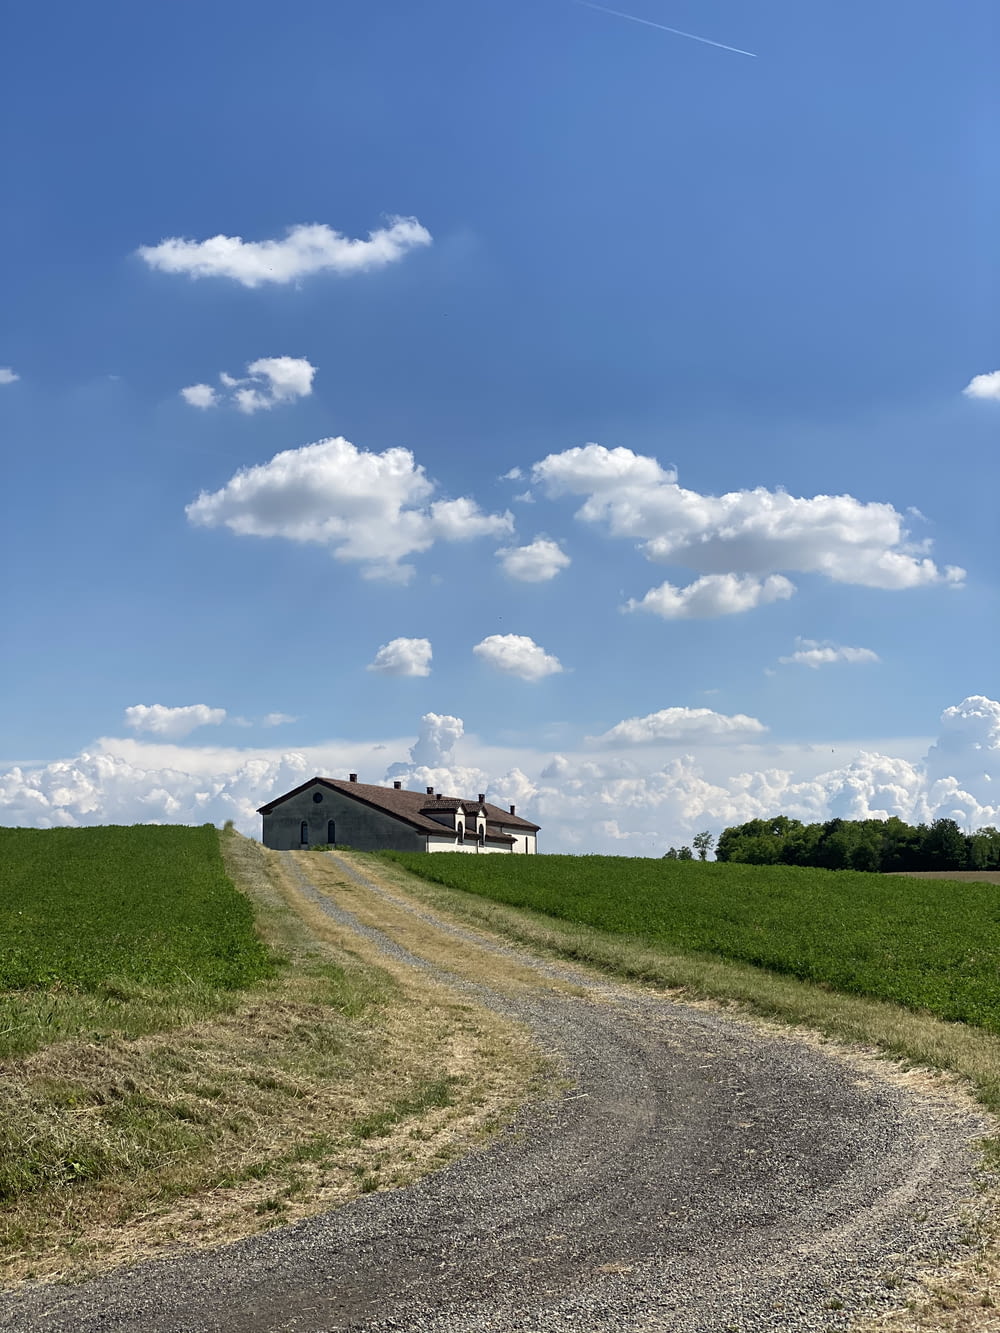 brown house on green grass field under blue sky and white clouds during daytime